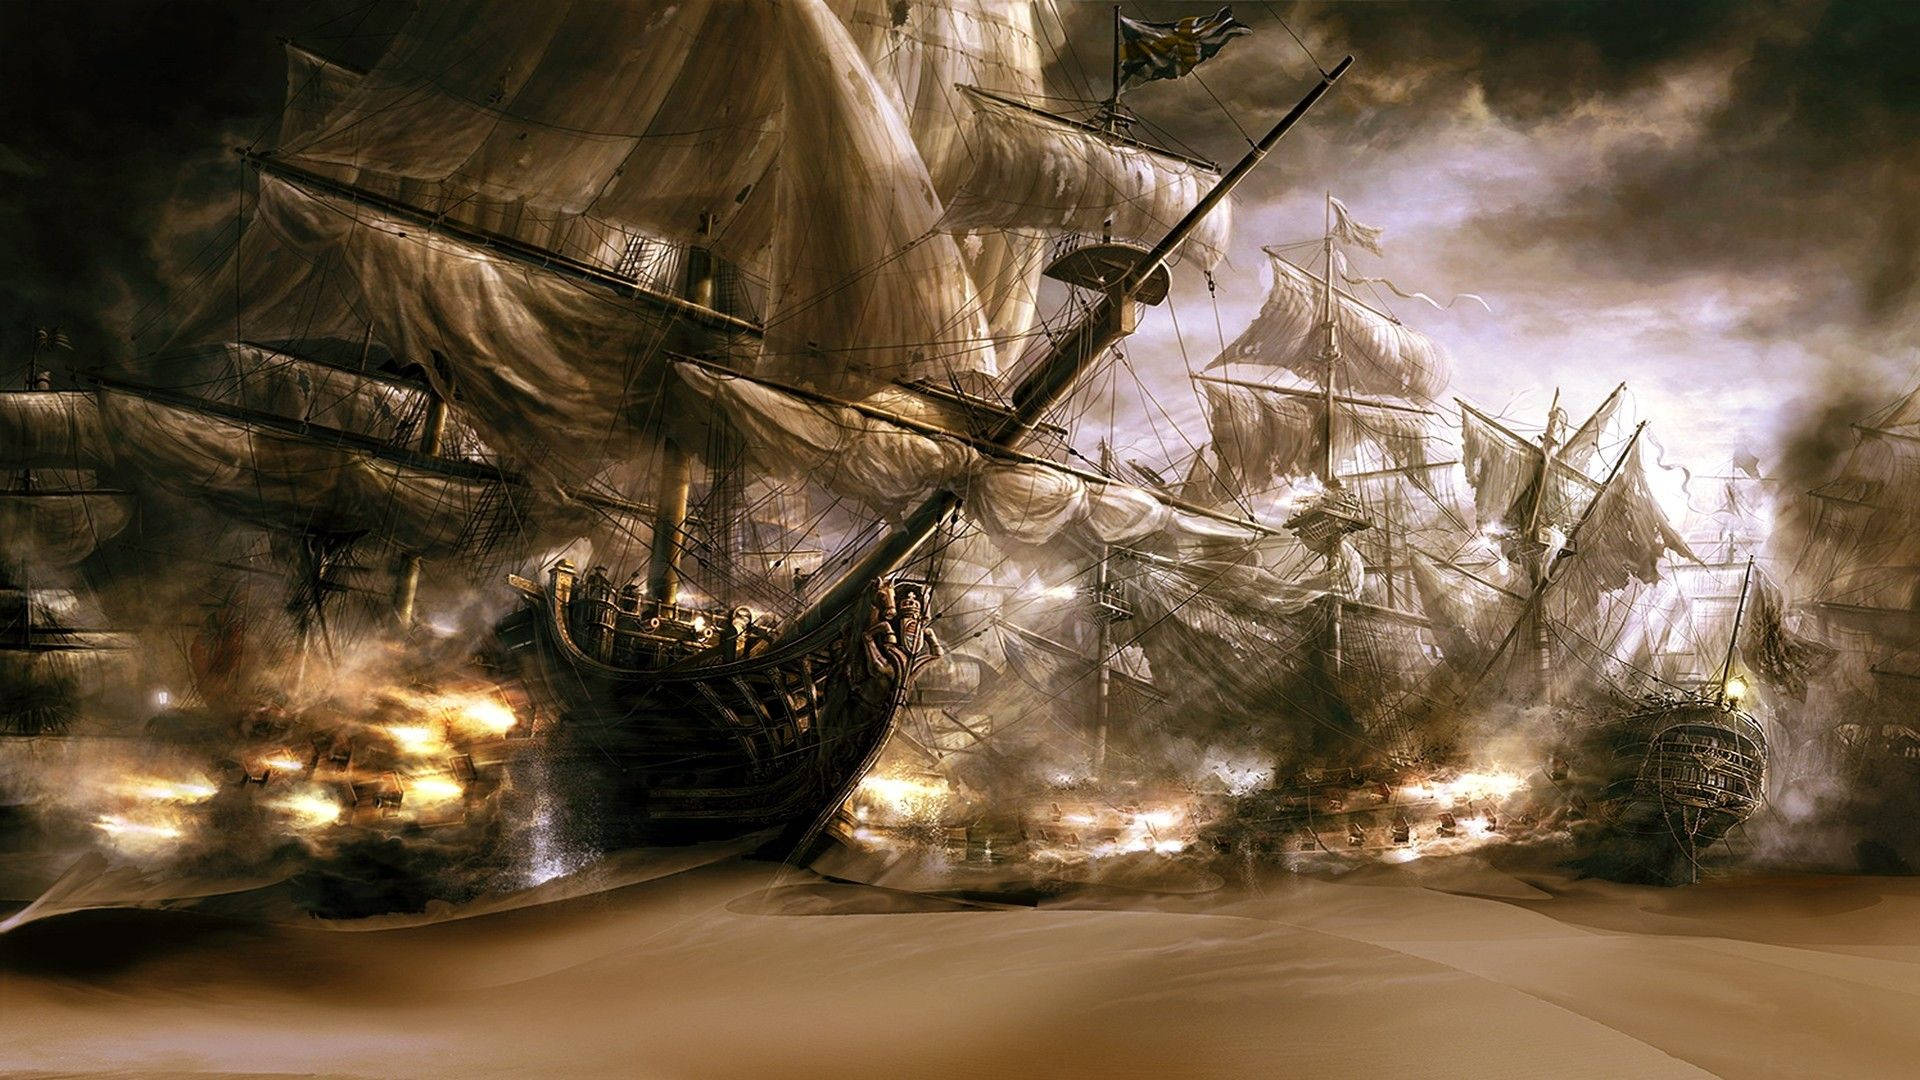 A peaceful, sunny day at the beach with two old pirate ships. Wallpaper